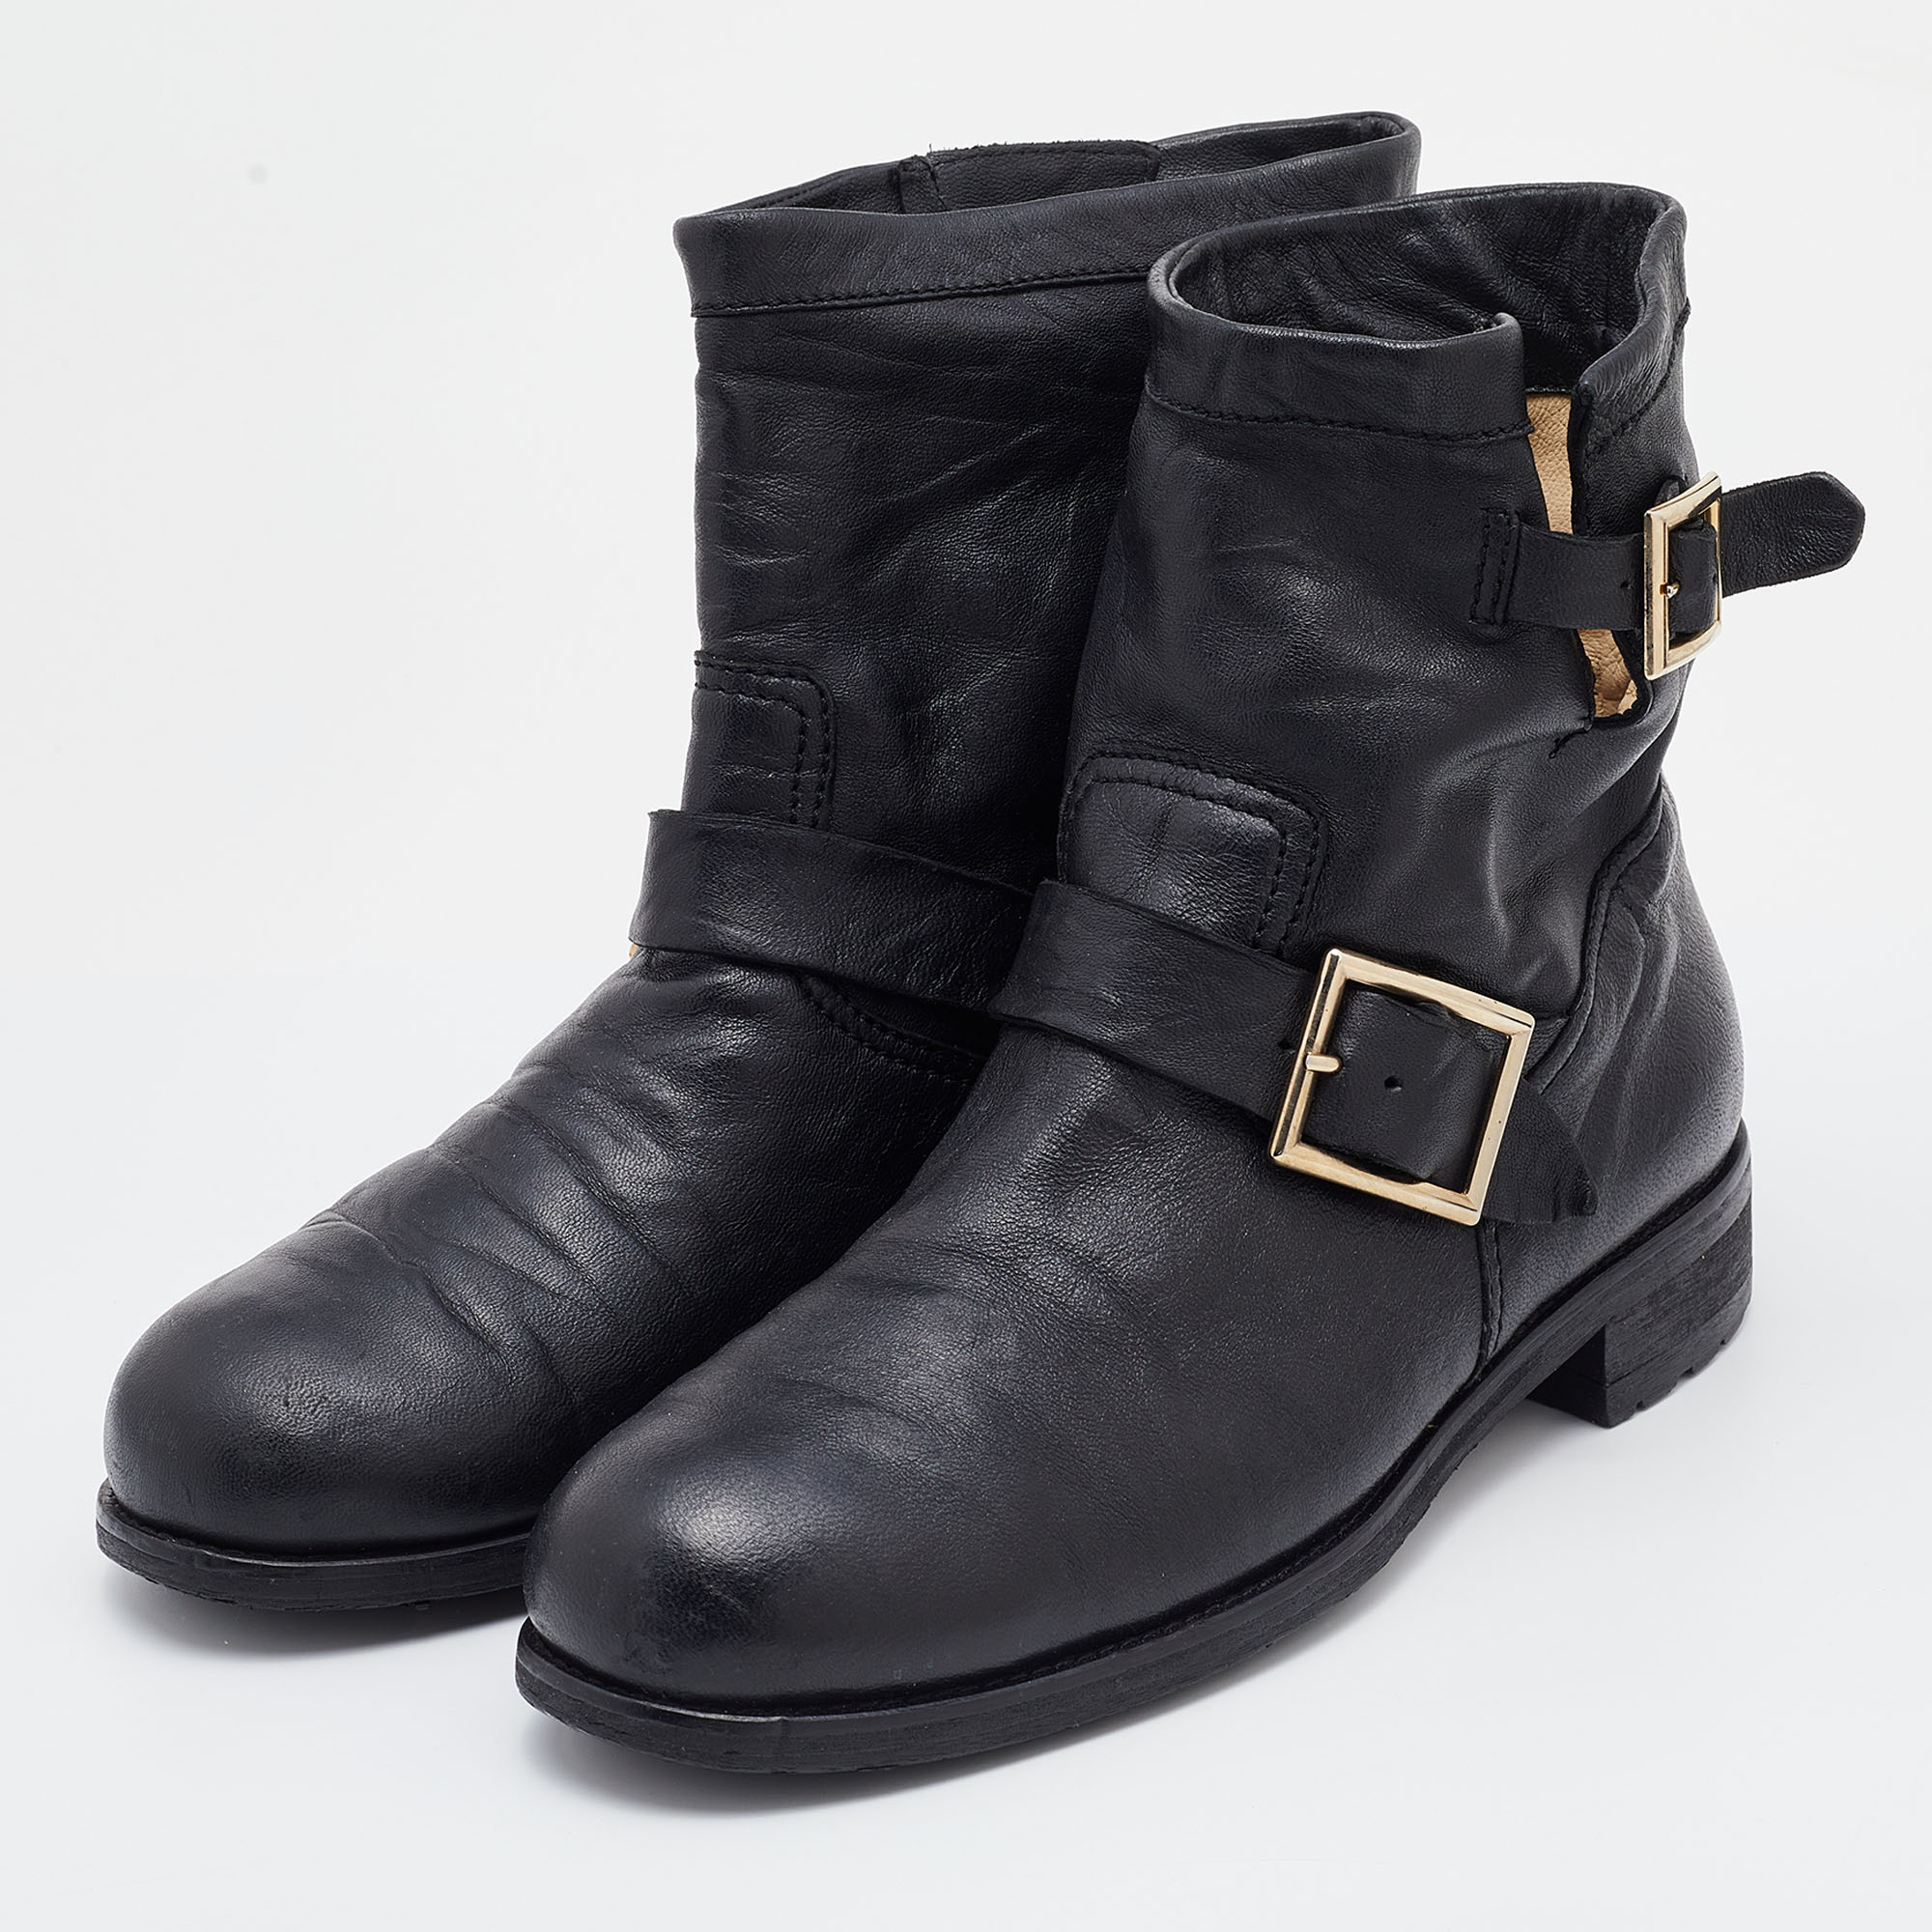 

Jimmy Choo Black Leather Buckle Detail Ankle Boots Size